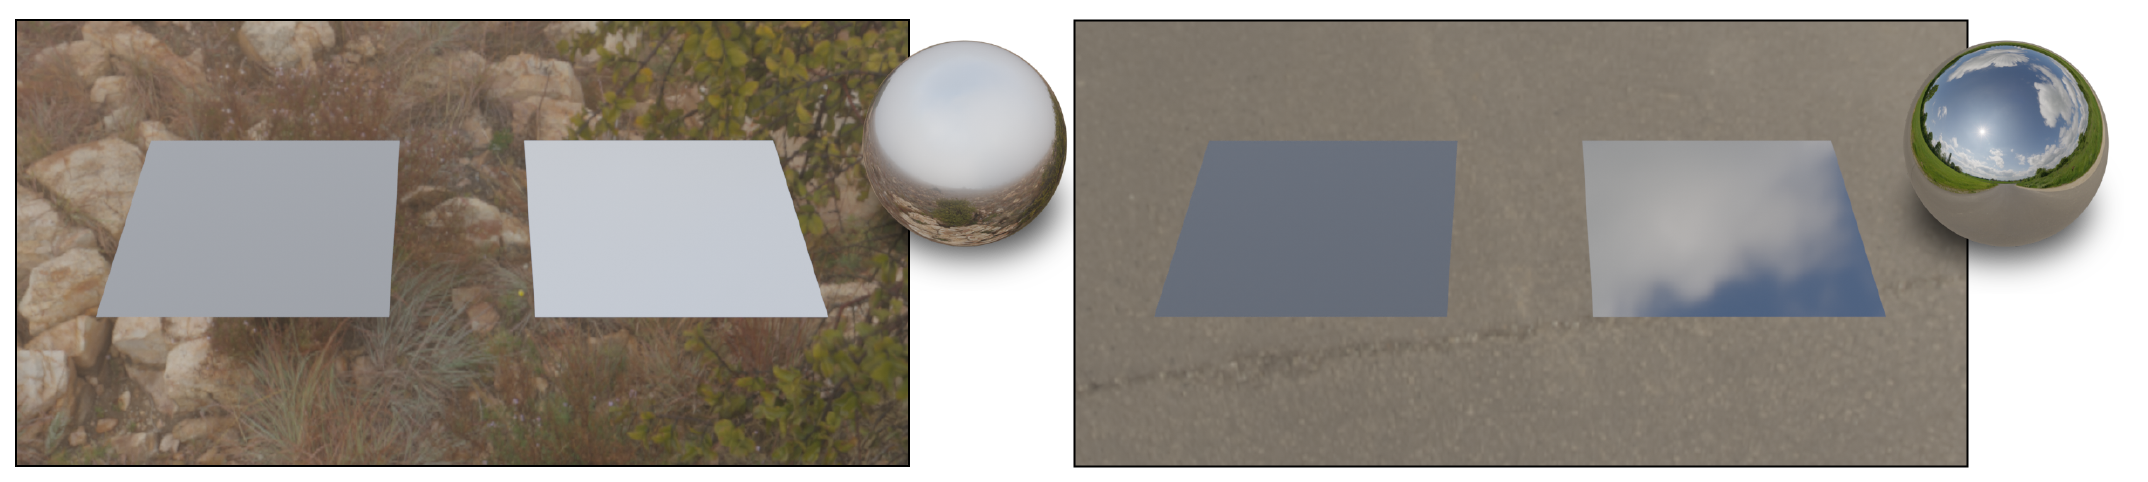 Two images that show the same matte and glossy surface in two lighting setups. The first image is rendered with a cloudy environment and the surfaces look similar. The second image is rendered with a sunny environment and the surfaces look very different.